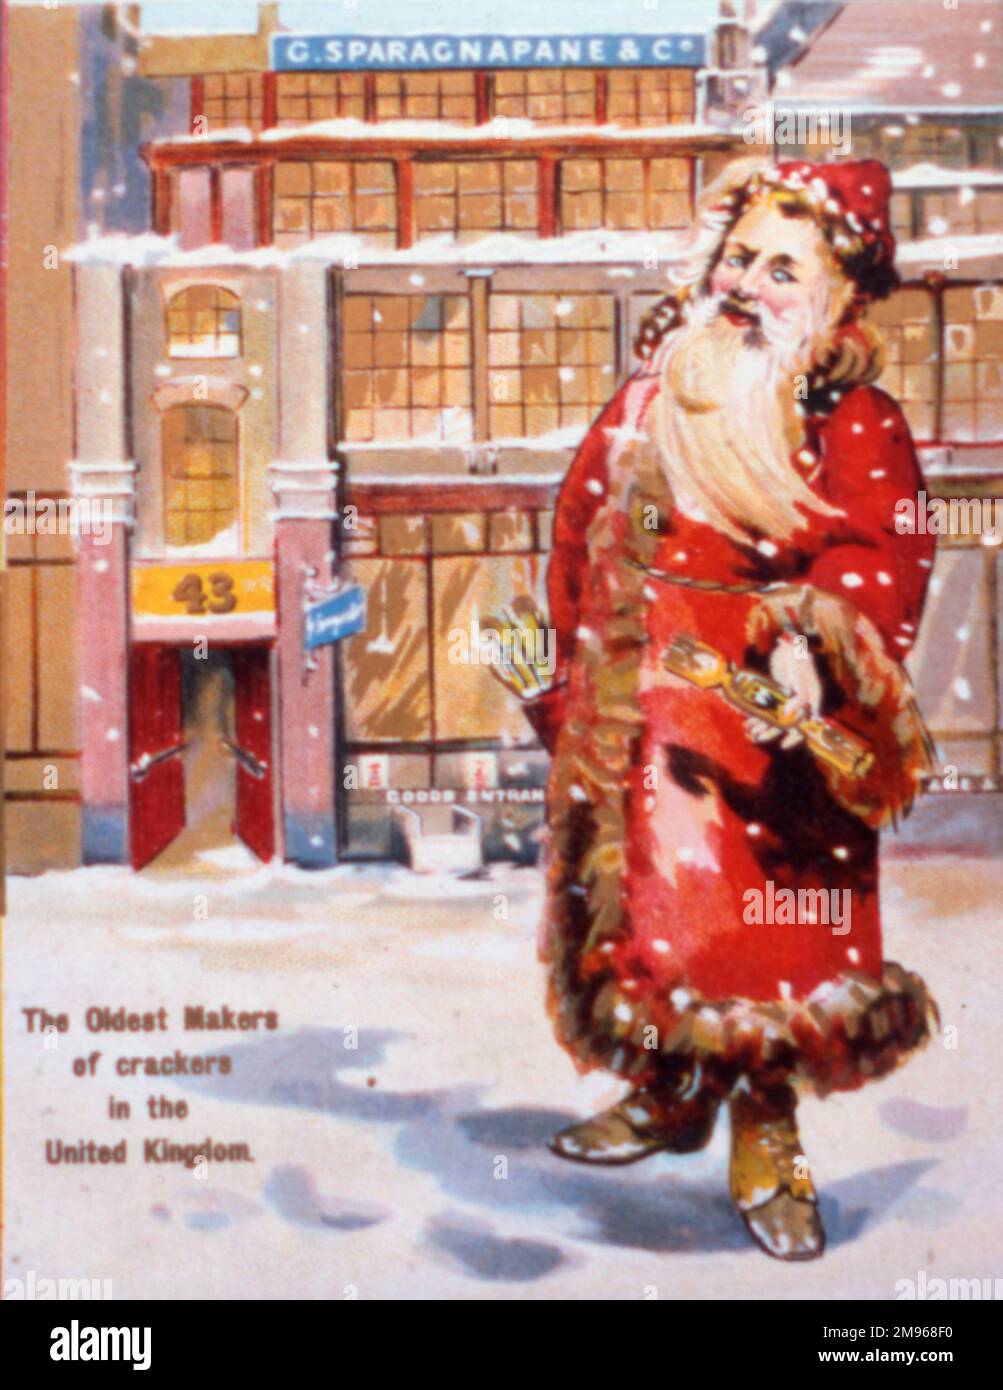 Advertisement for Sparagnapane's Christmas crackers, claiming to the oldest manufacturer of crackers in the United Kingdom, a fact confirmed by Father Christmas who stands in the snow pointing out their offices in London. Stock Photo